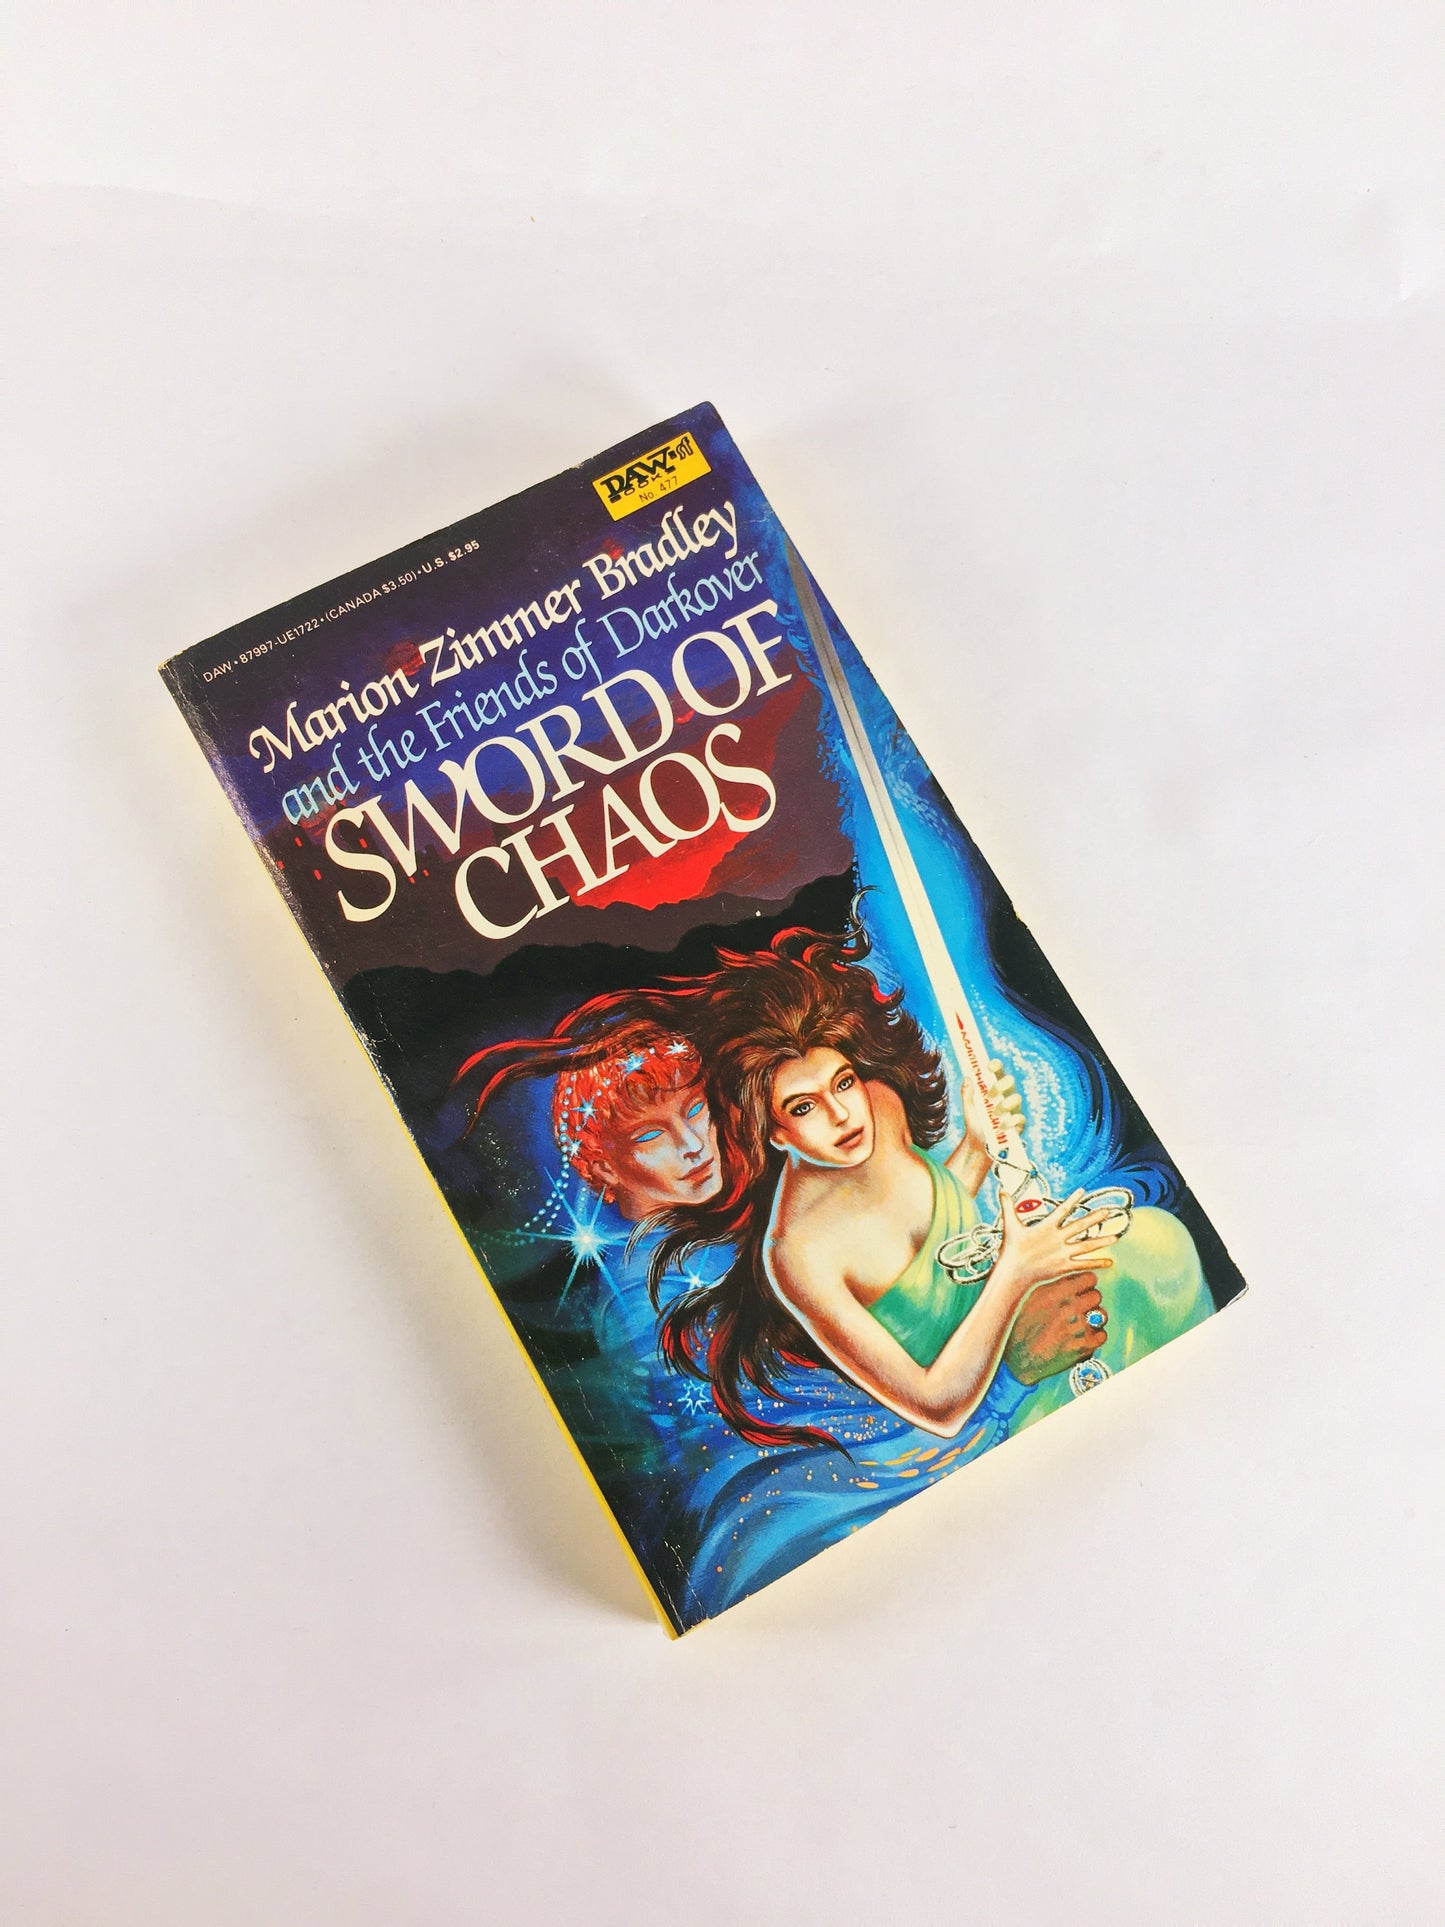 1982 Marion Zimmer Bradley FIRST PRINTING Darkover vintage paperback book Hawkmistress Sword Chaos StormQueen Ace Yellow Science Fiction